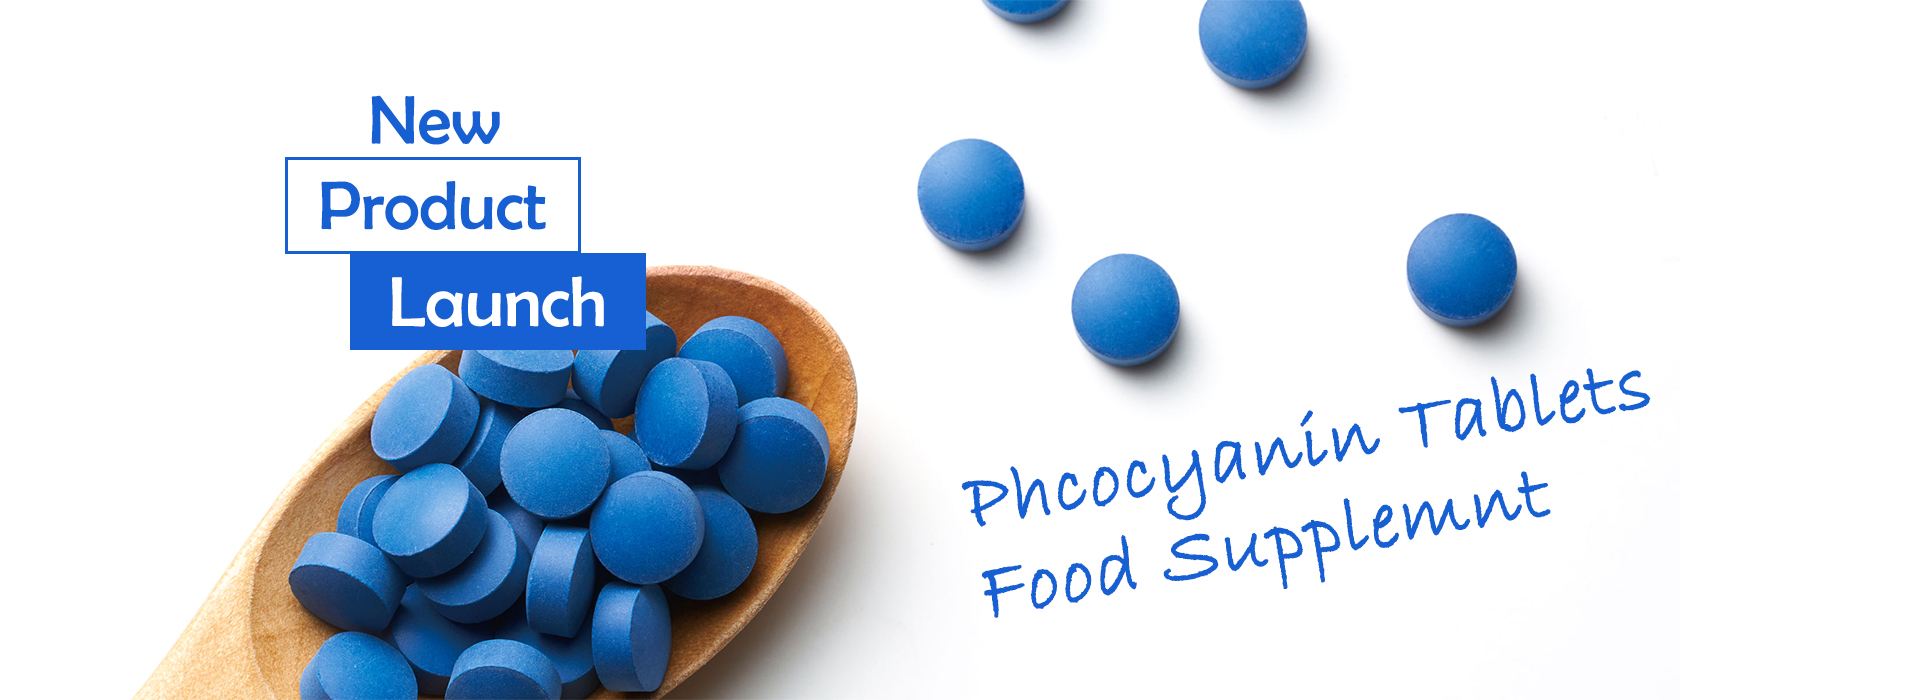 New product launch: phycocyanin tablets